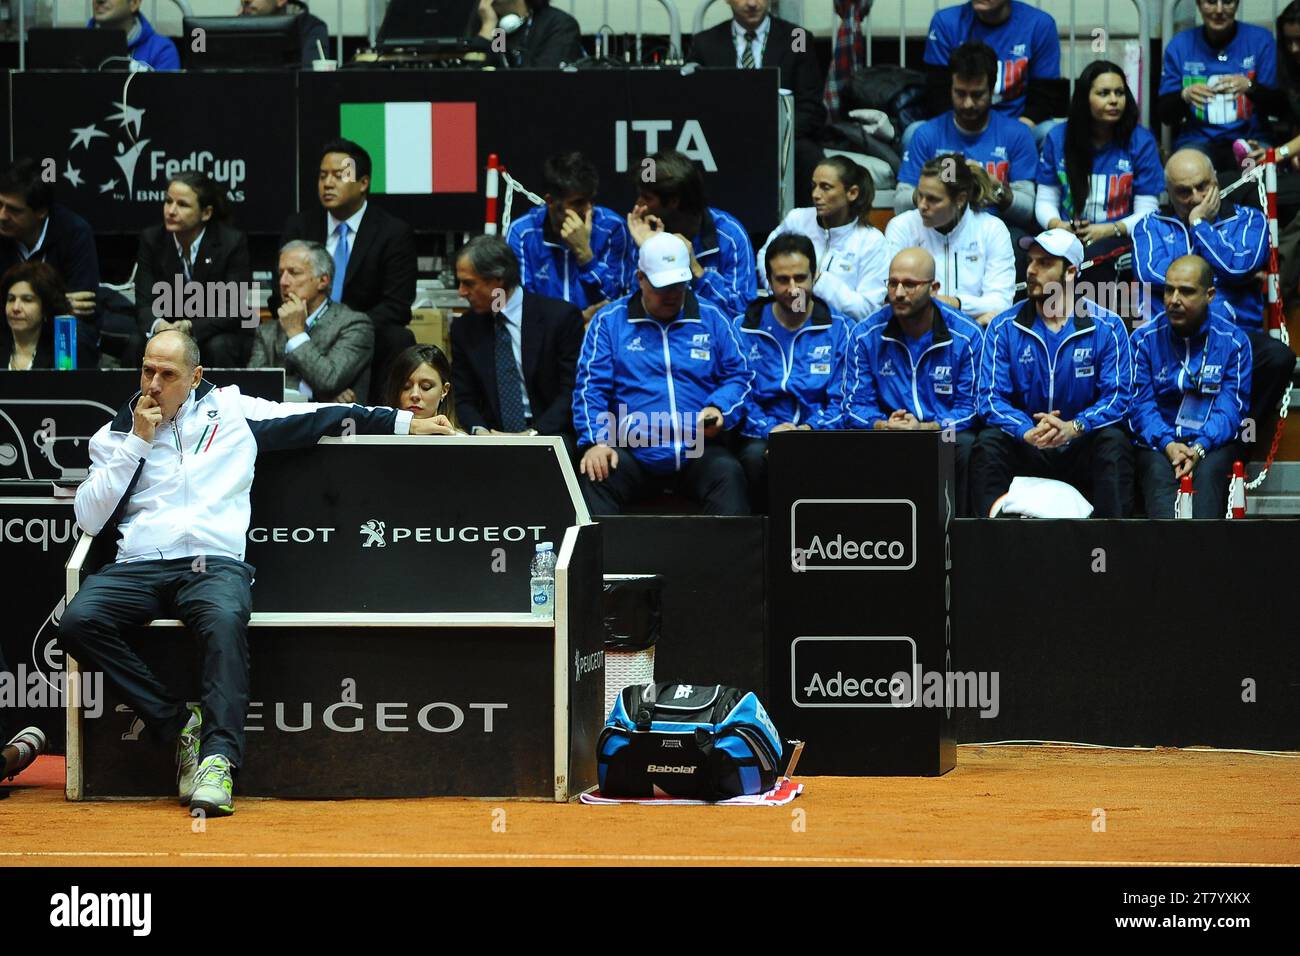 Corrado Barazzutti coach of Italy sits on the bench during the first round of Fed Cup 2015 match between Italy and France at 105 Stadium on January 07, 2015 in Genoa, Italy. Photo Massimo Cebrelli/DPPI Stock Photo